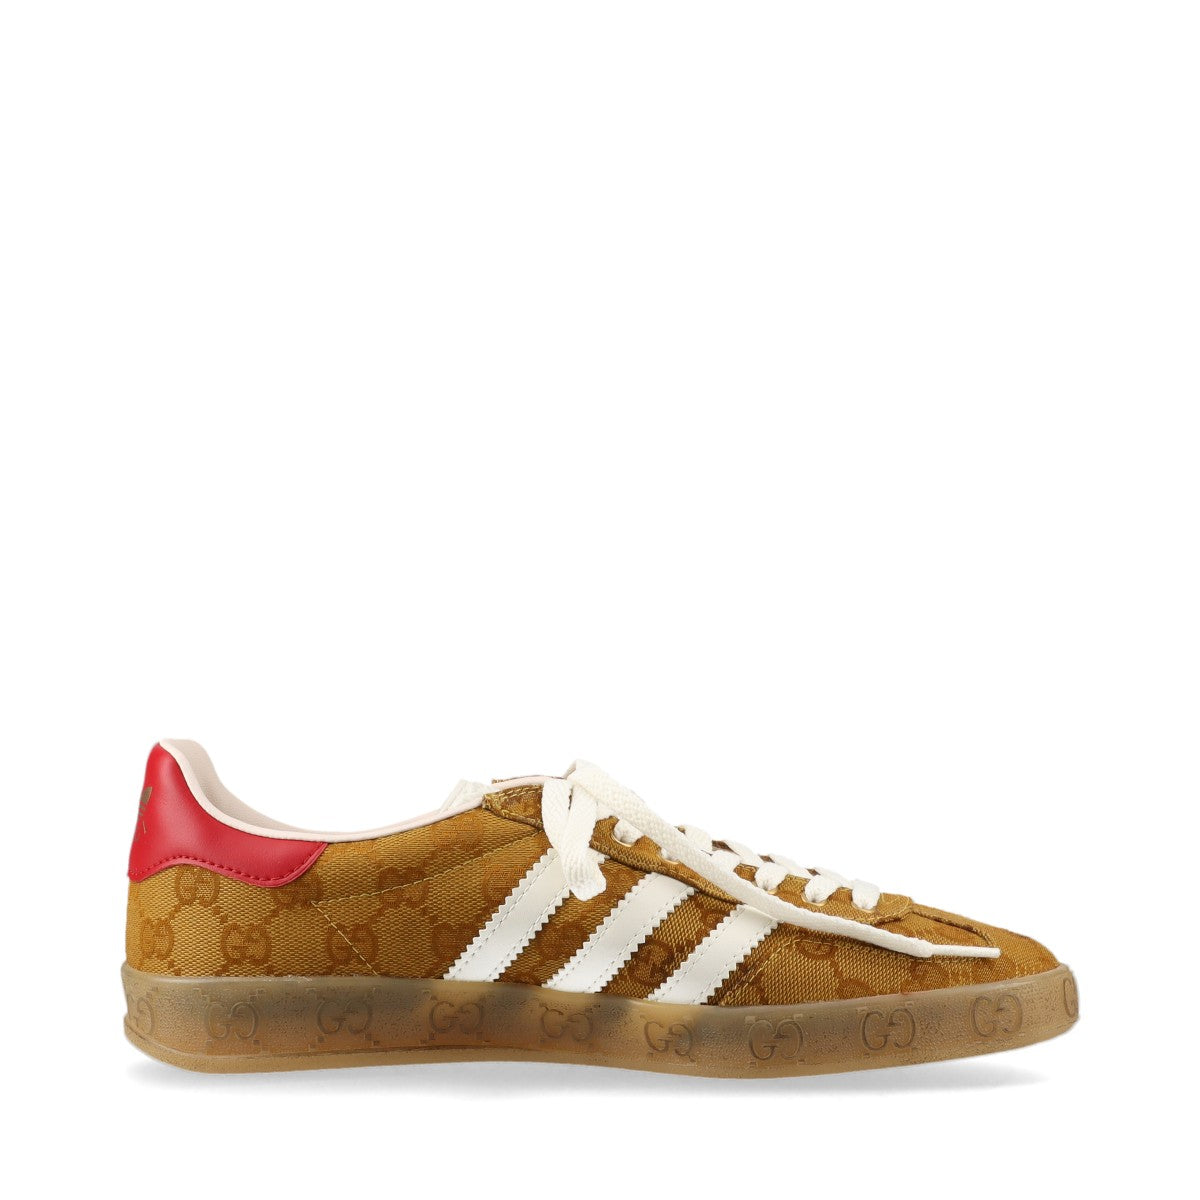 Gucci x Adidas Gazelle 22SS Canvas & Leather Sneakers 25cm Unisex Brown x white 707850 GG Supreme Three Stripes Box There is a storage bag